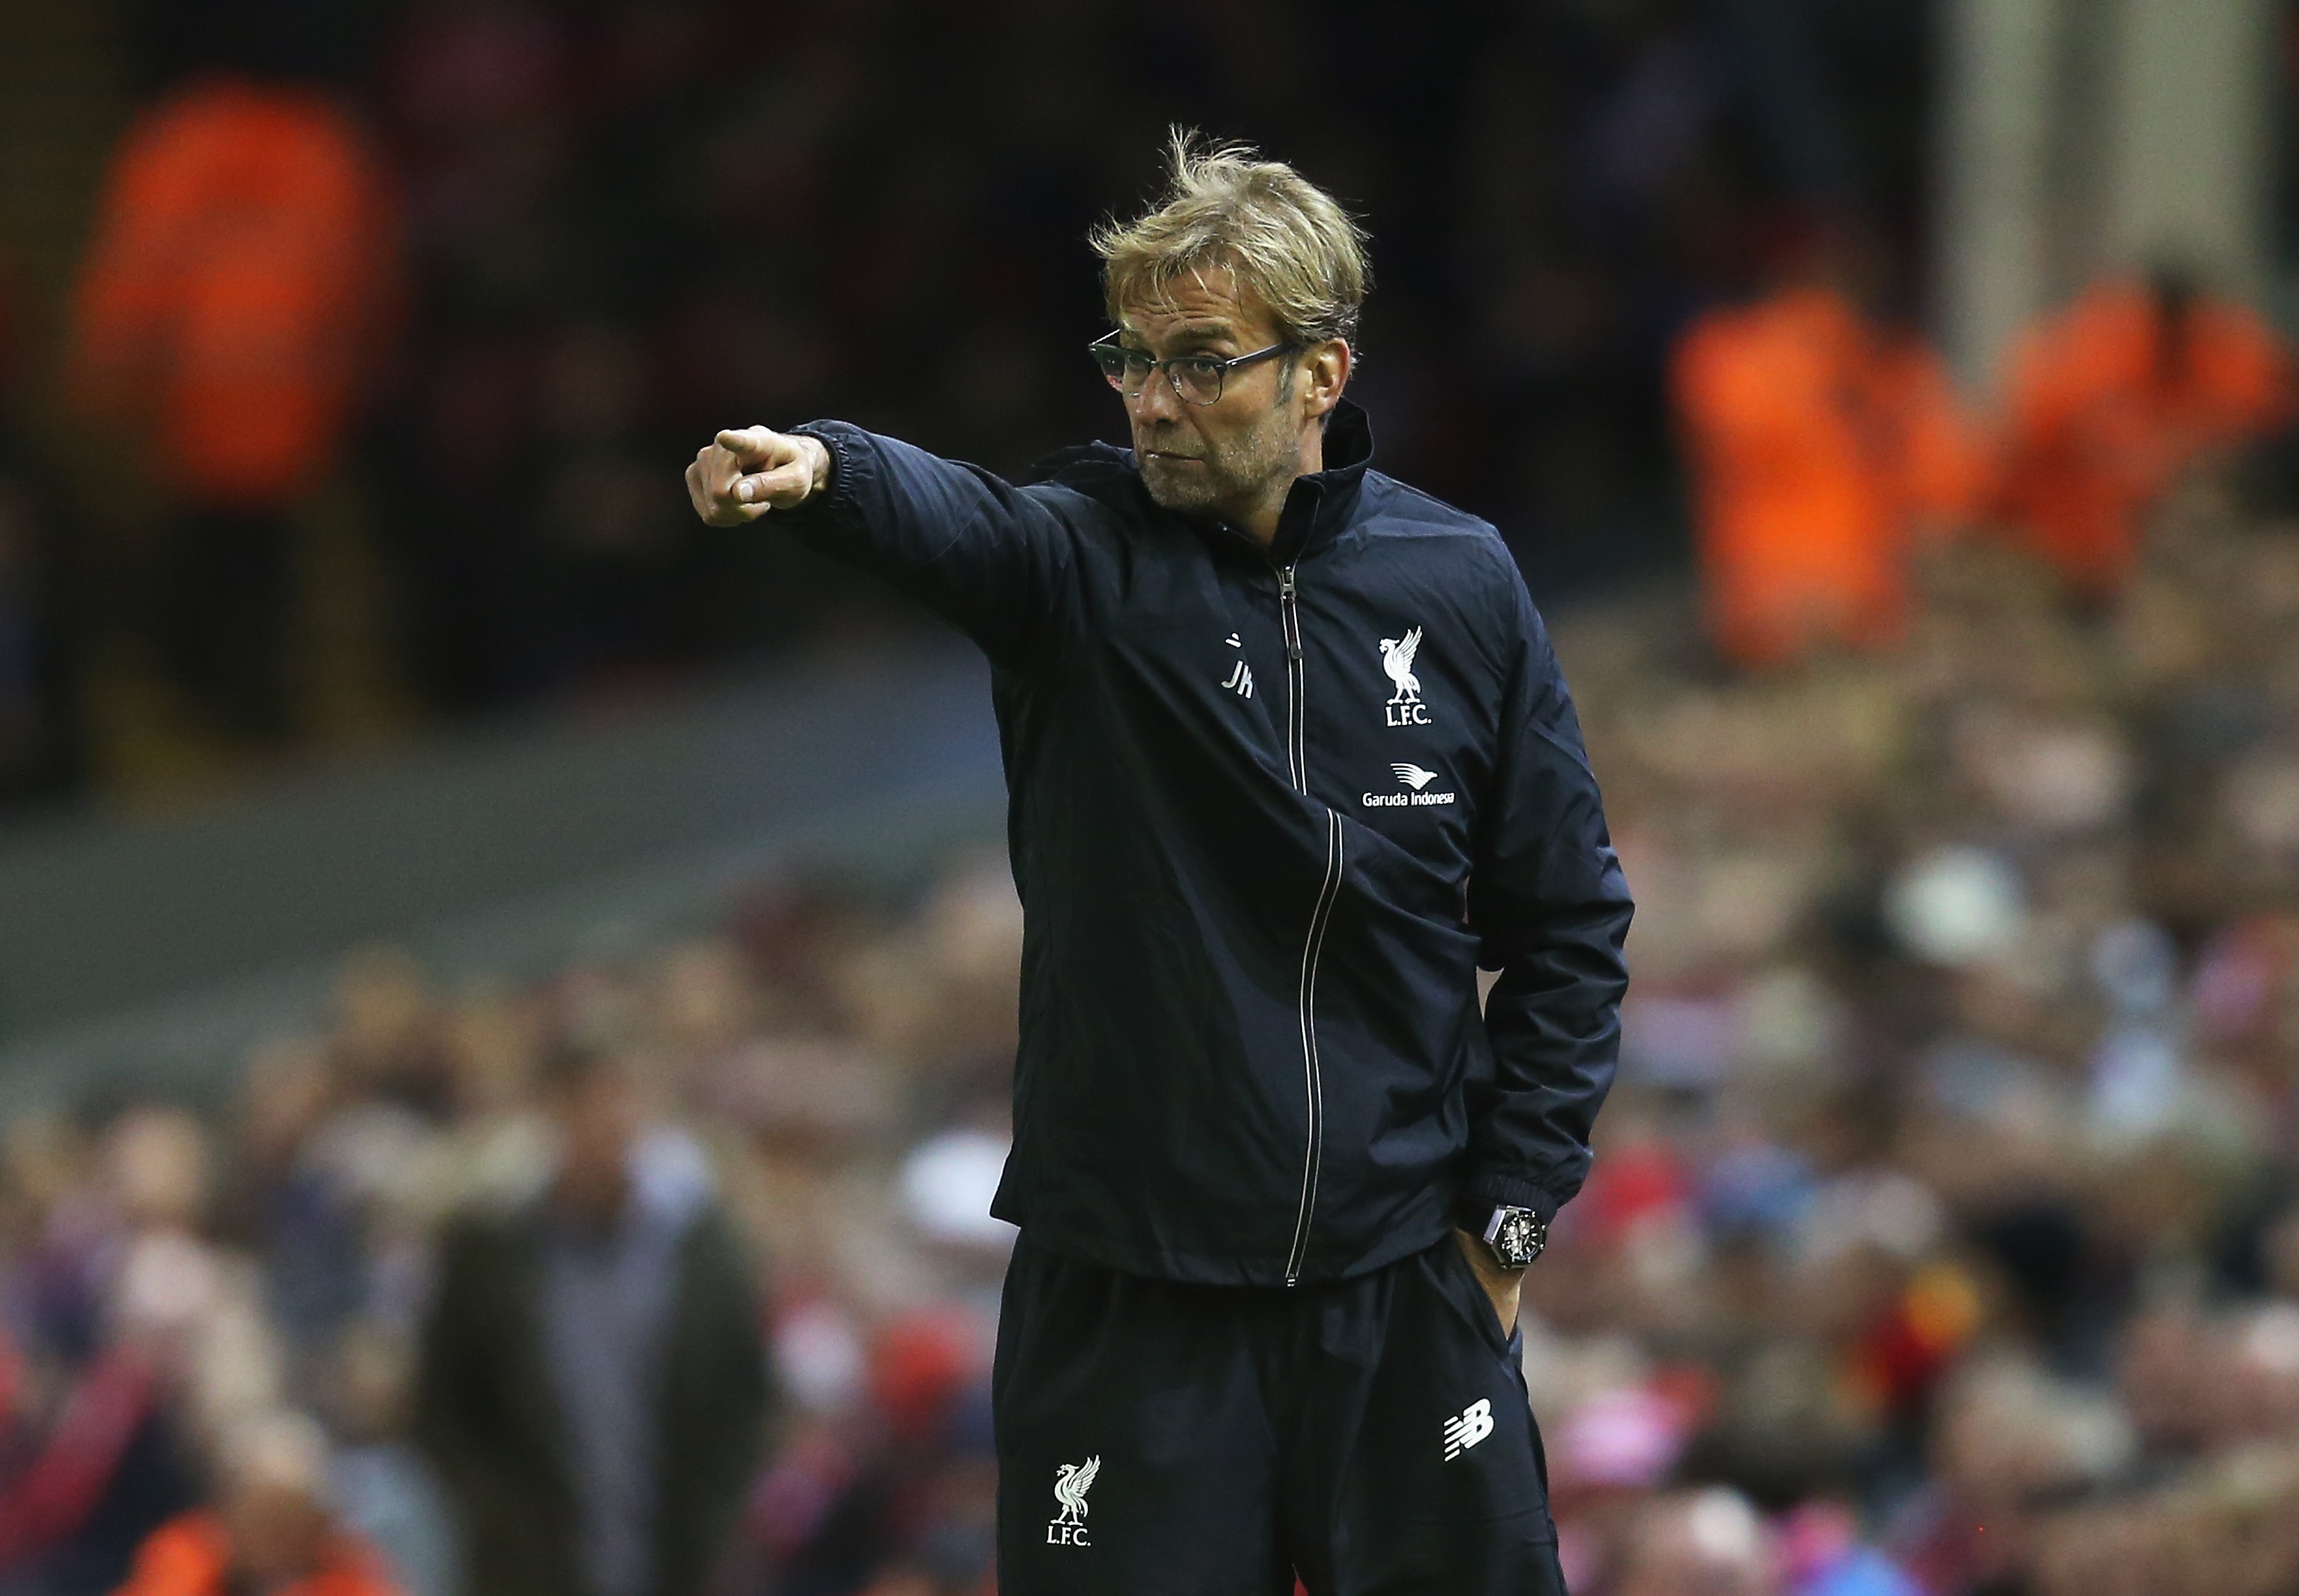 The Reds have not lost since Jurgen Klopp took over as manager. (Getty)